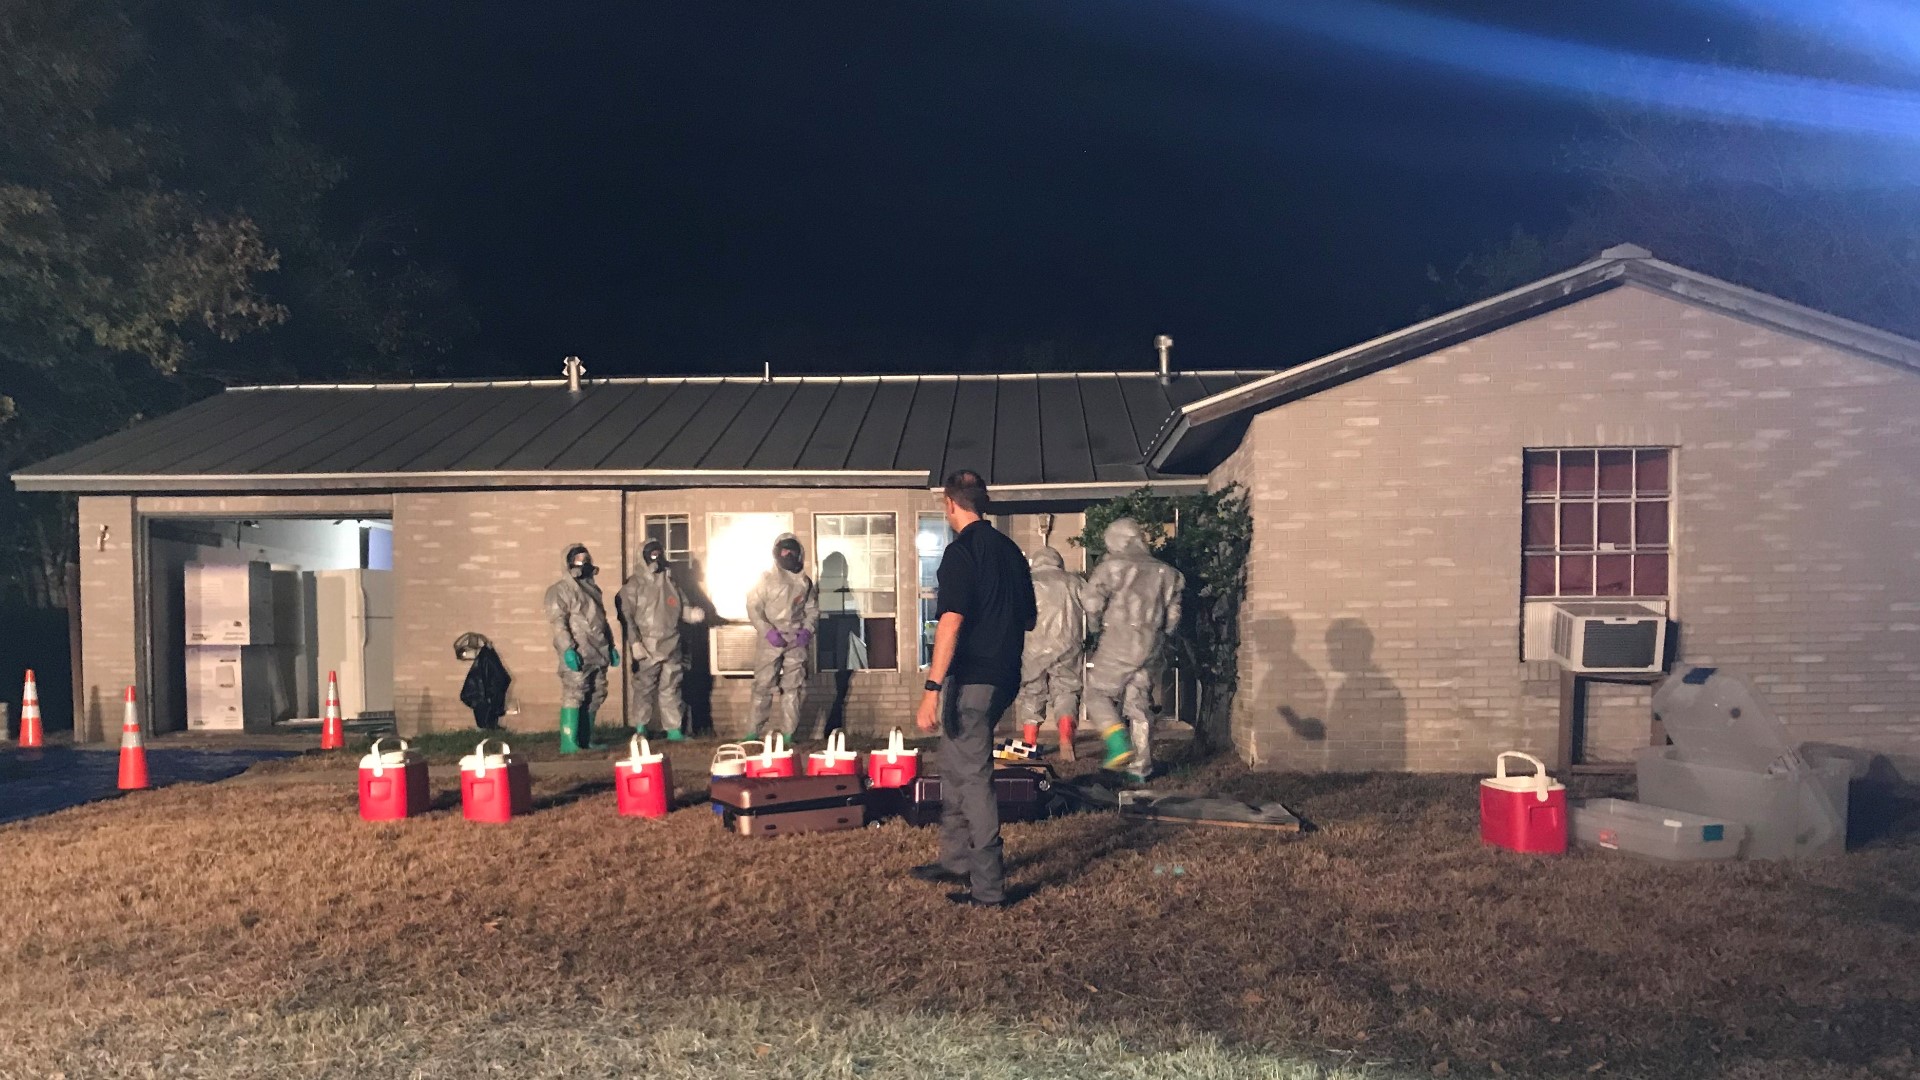 The Bexar County Sheriff says deputies found about $29 million worth of meth and all the materials needed to process it inside a house.